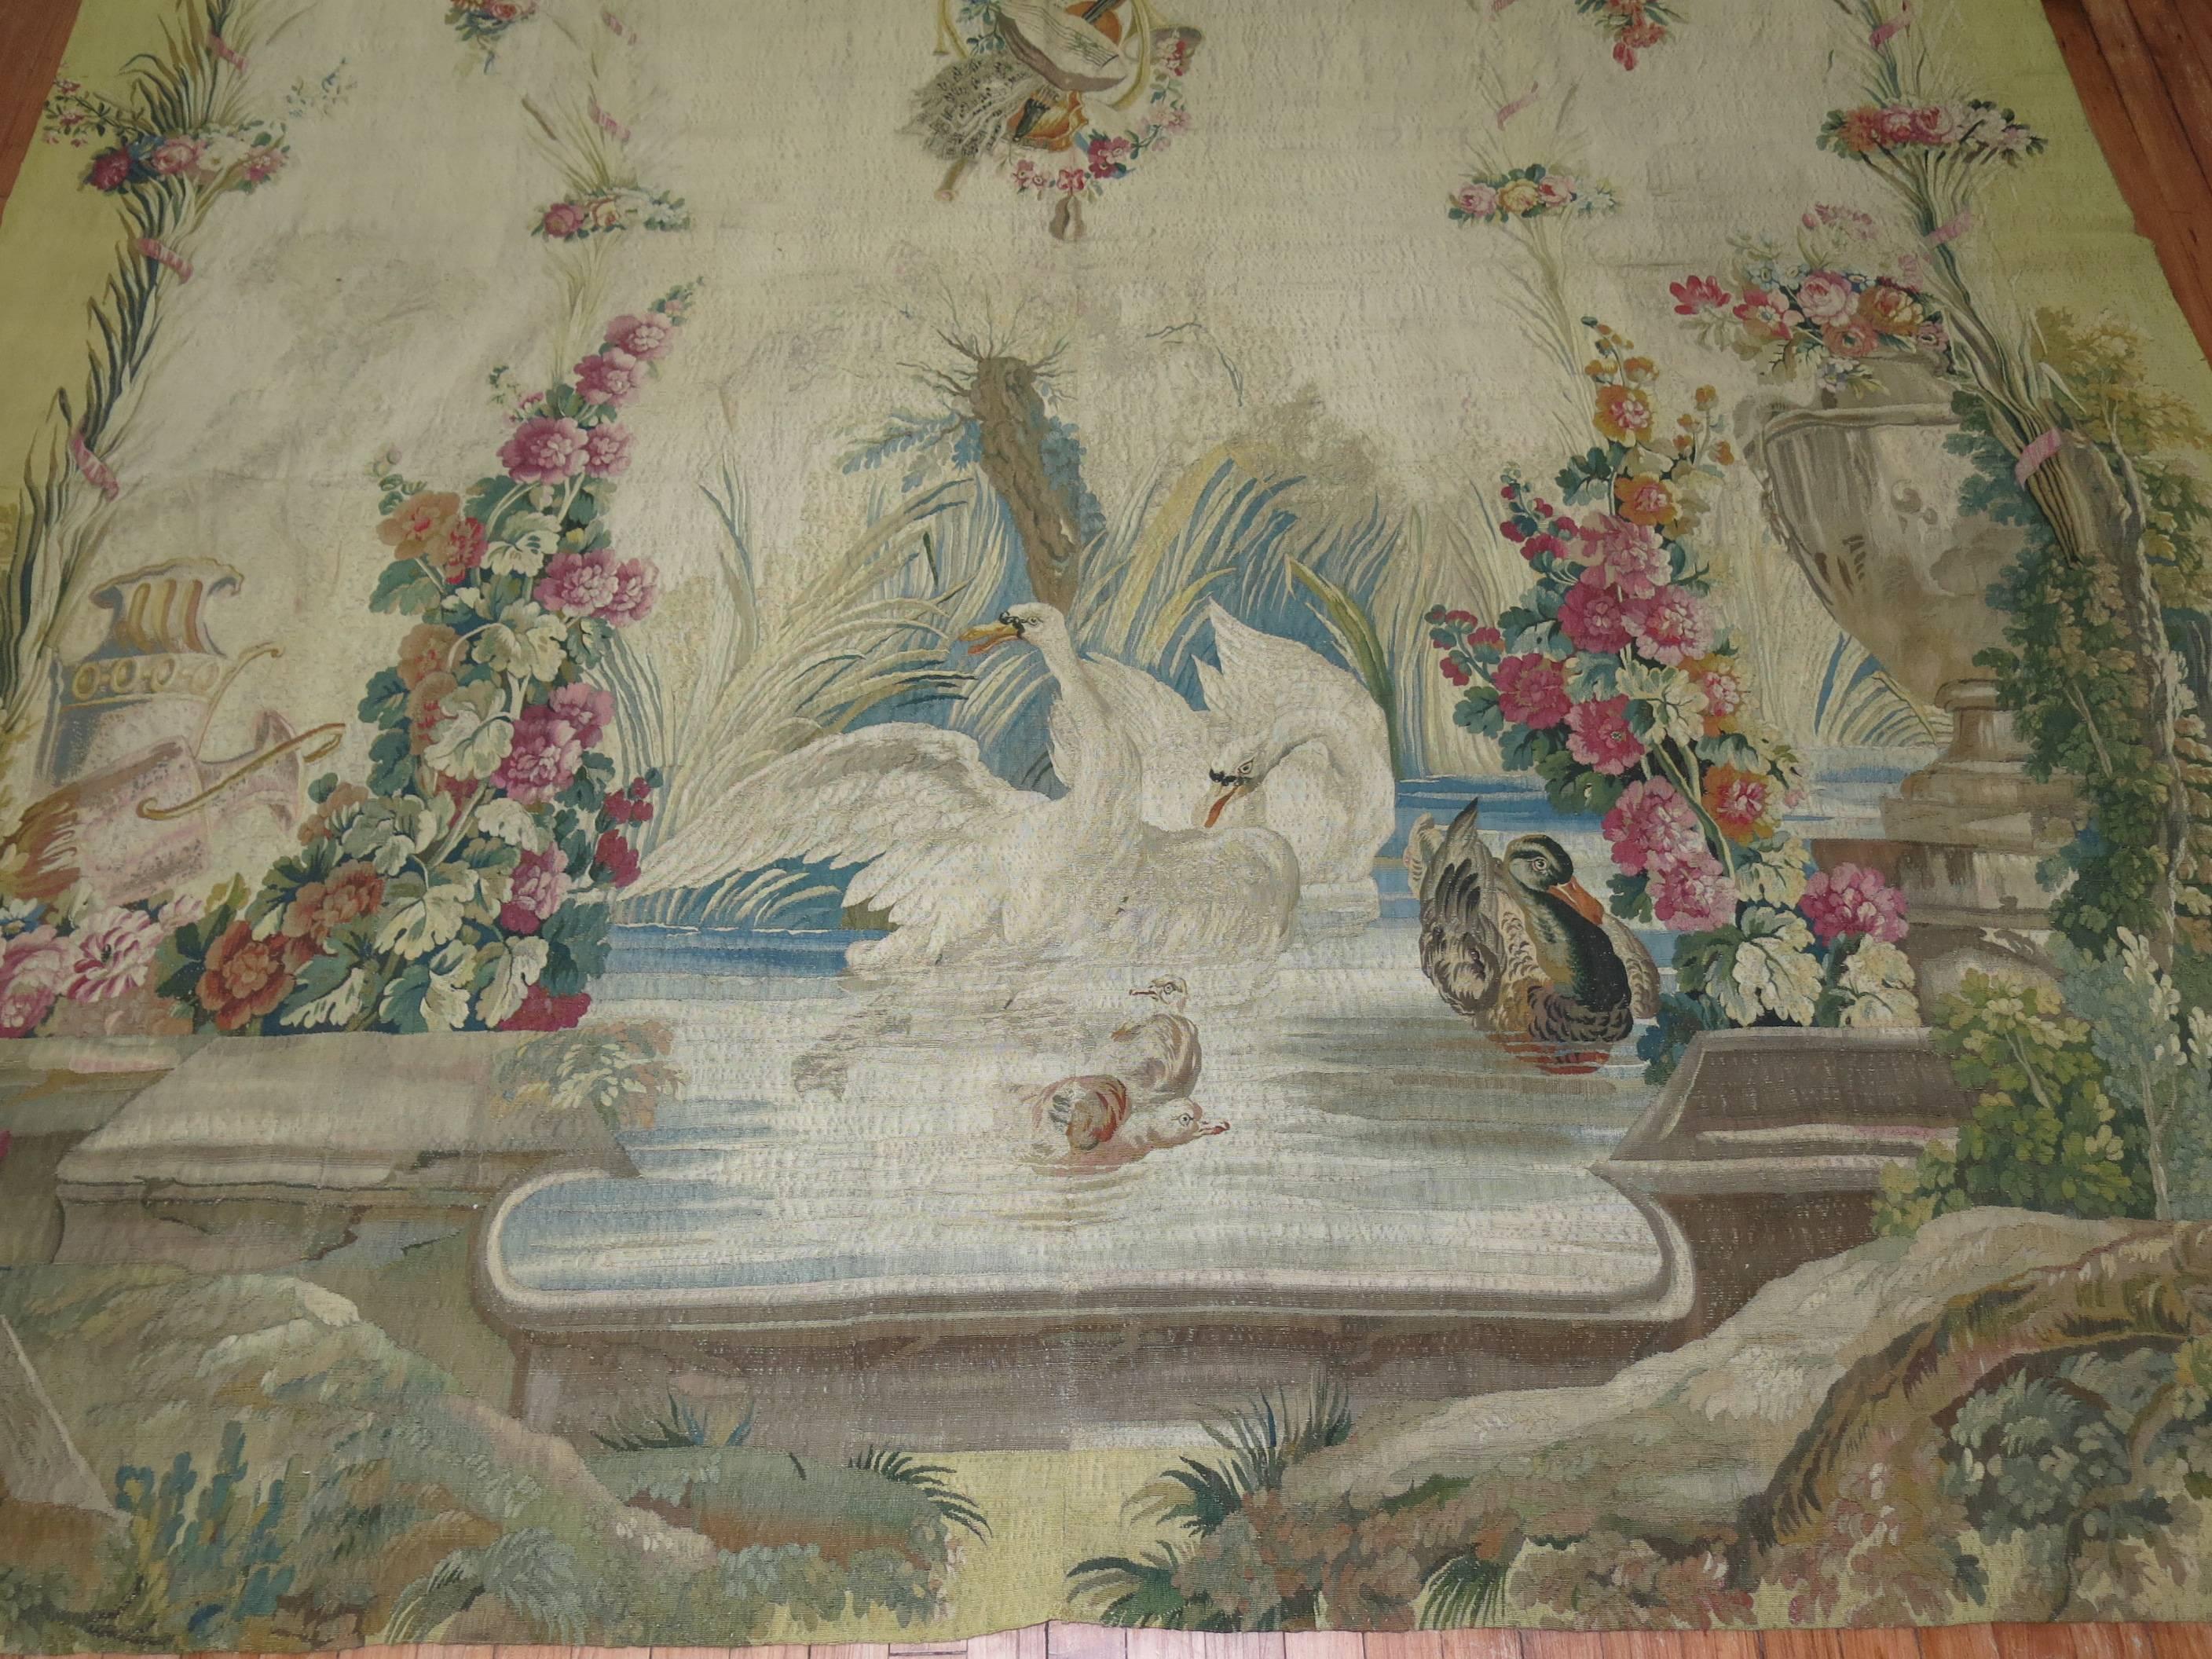 Swans Ducks 18th Century Aubusson French Tapestry Panel For Sale 3